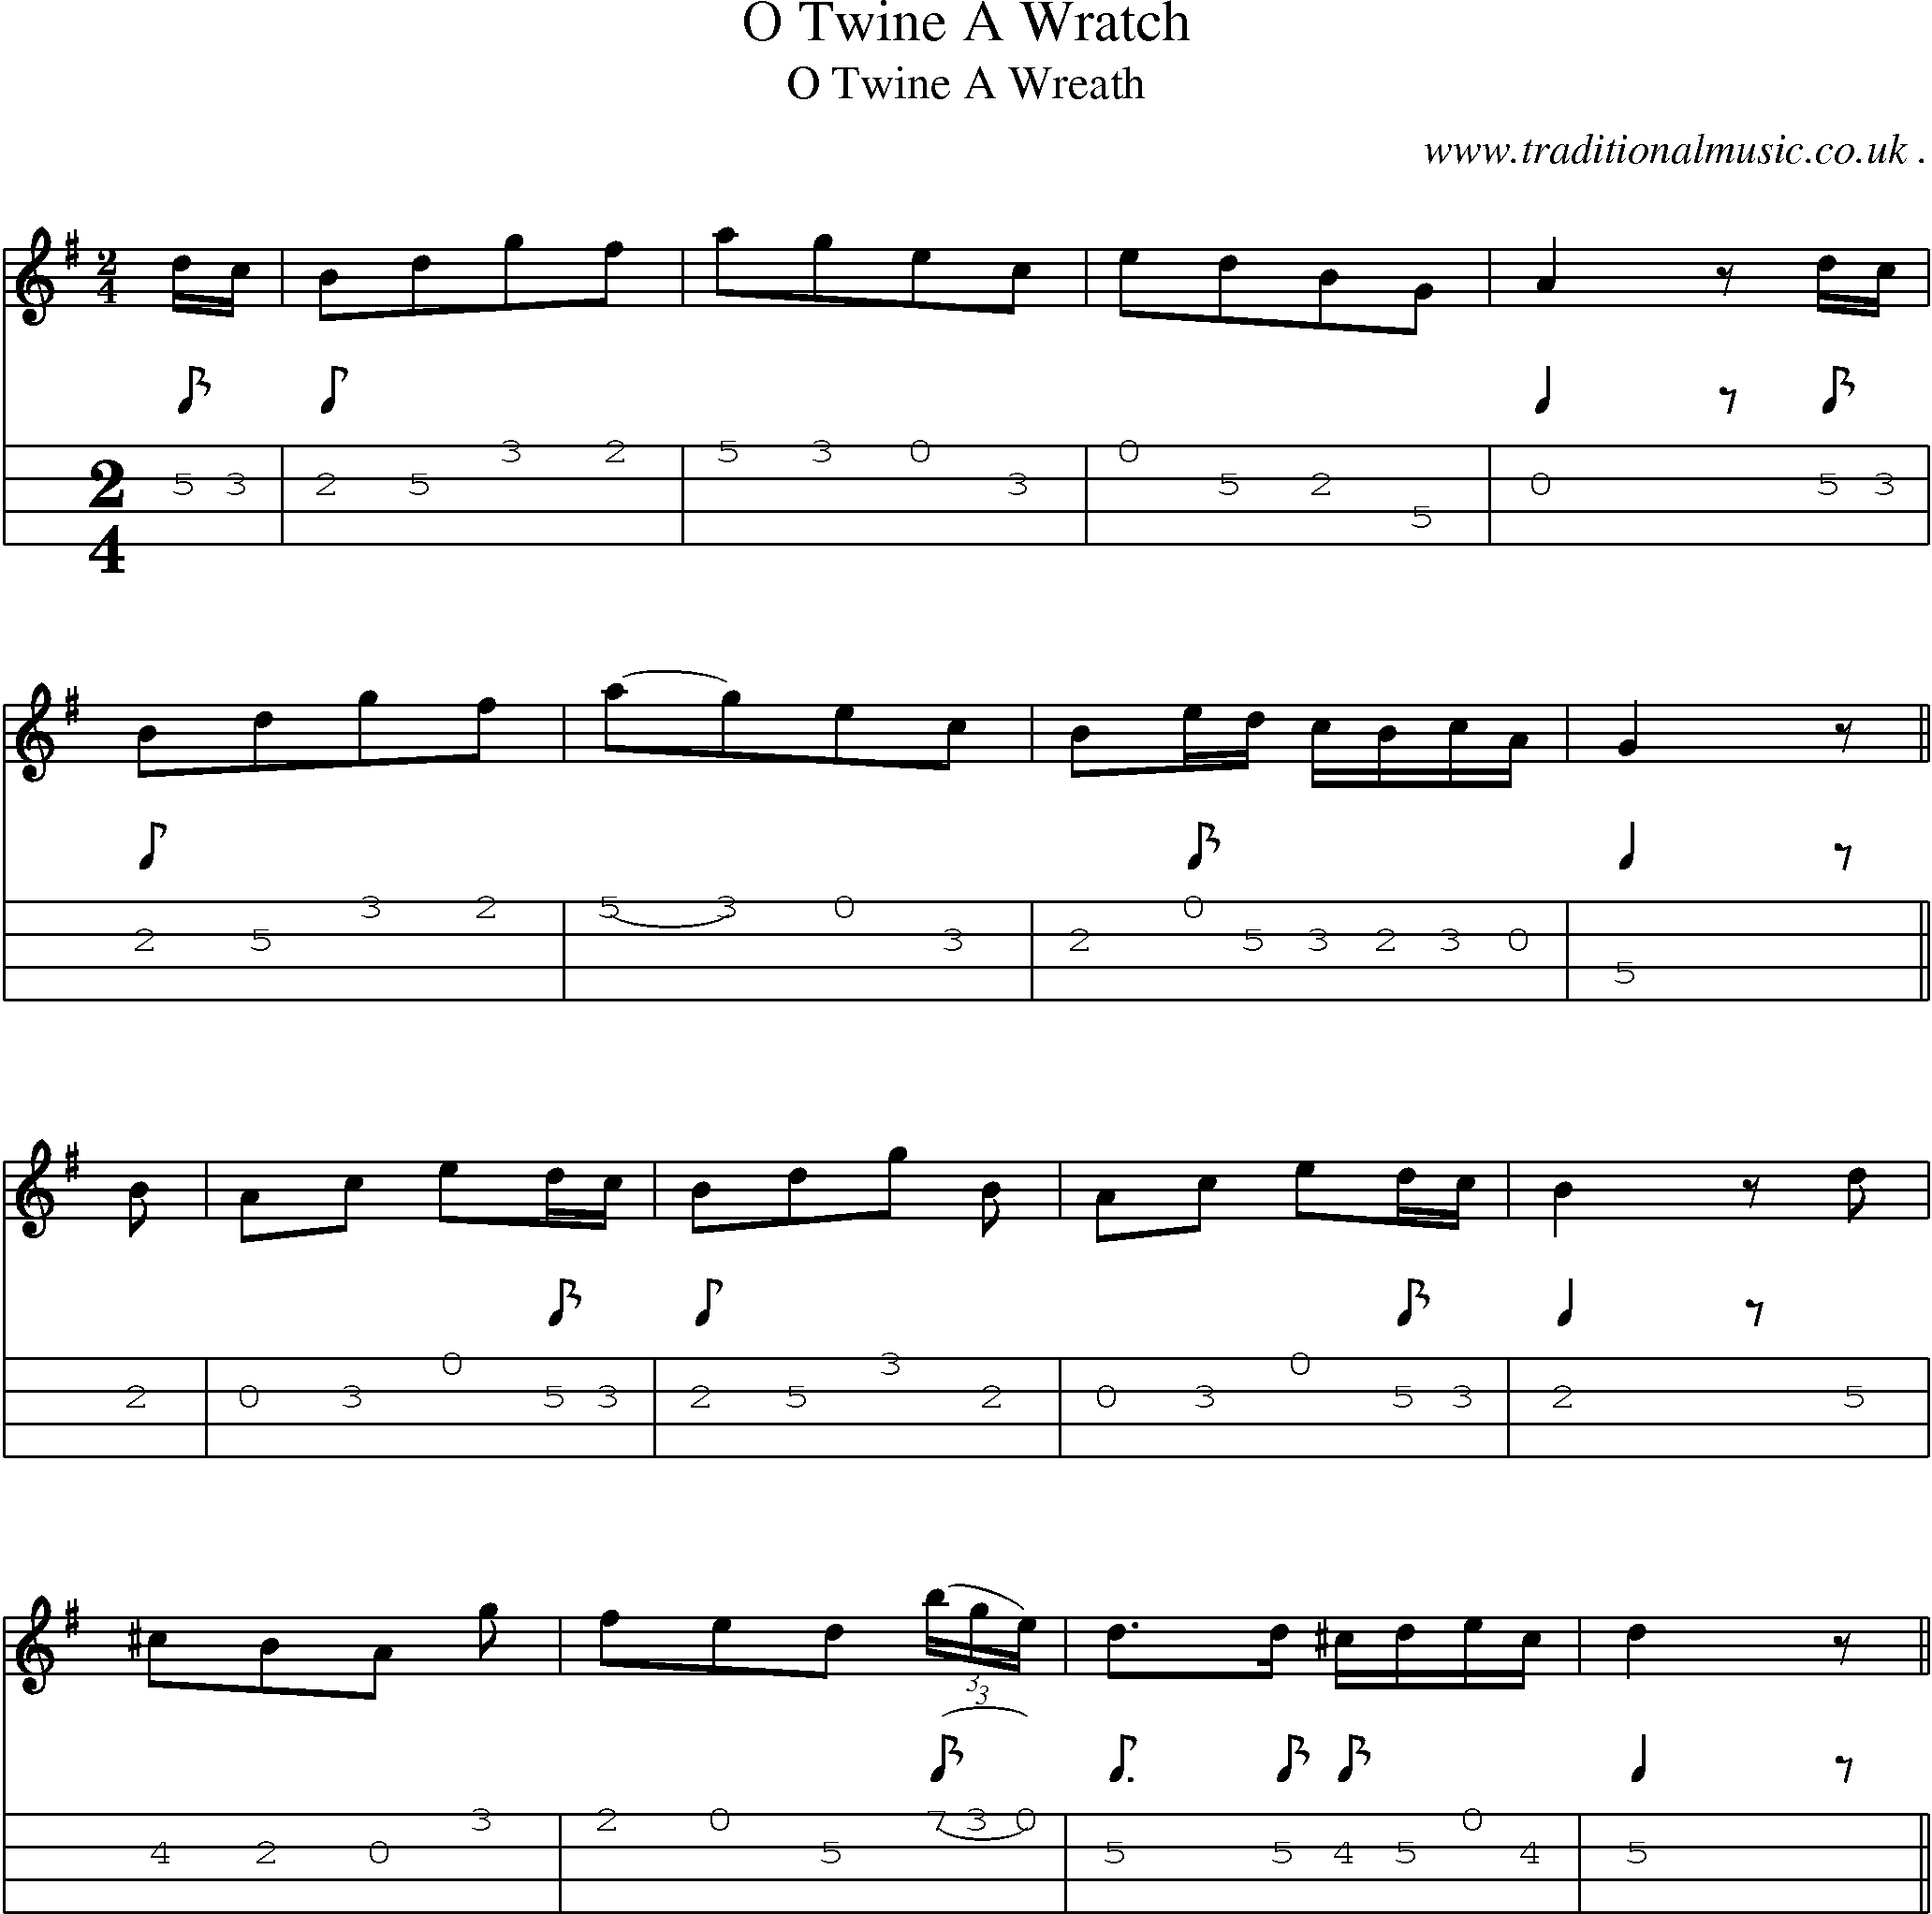 Sheet-Music and Mandolin Tabs for O Twine A Wratch